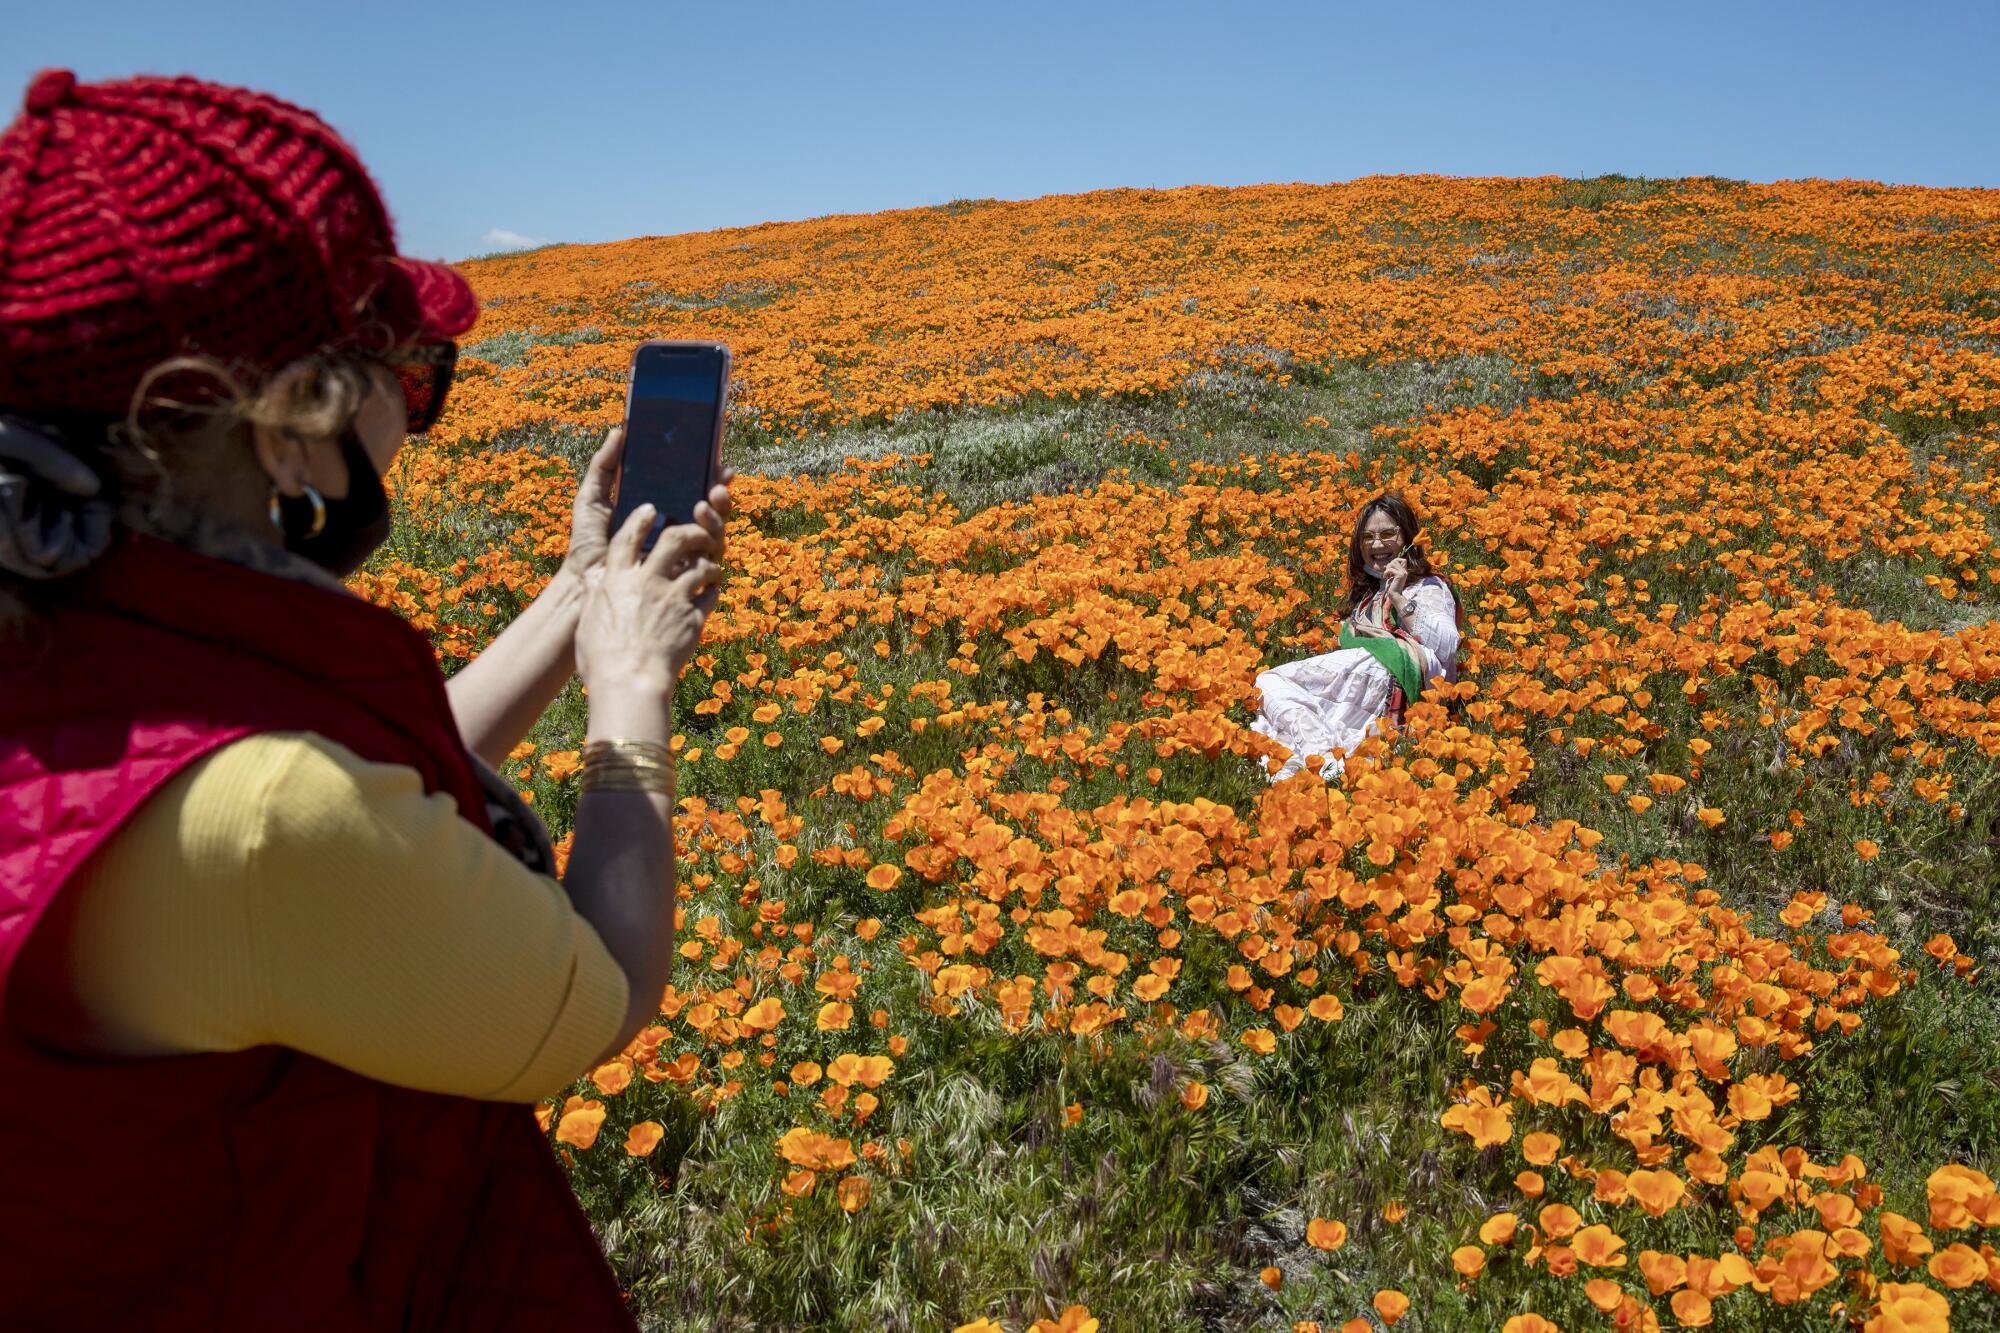 Shana Zhao, left, photographs her sister, Vivi Zhao, among blooming California poppies in a field in Lancaster.